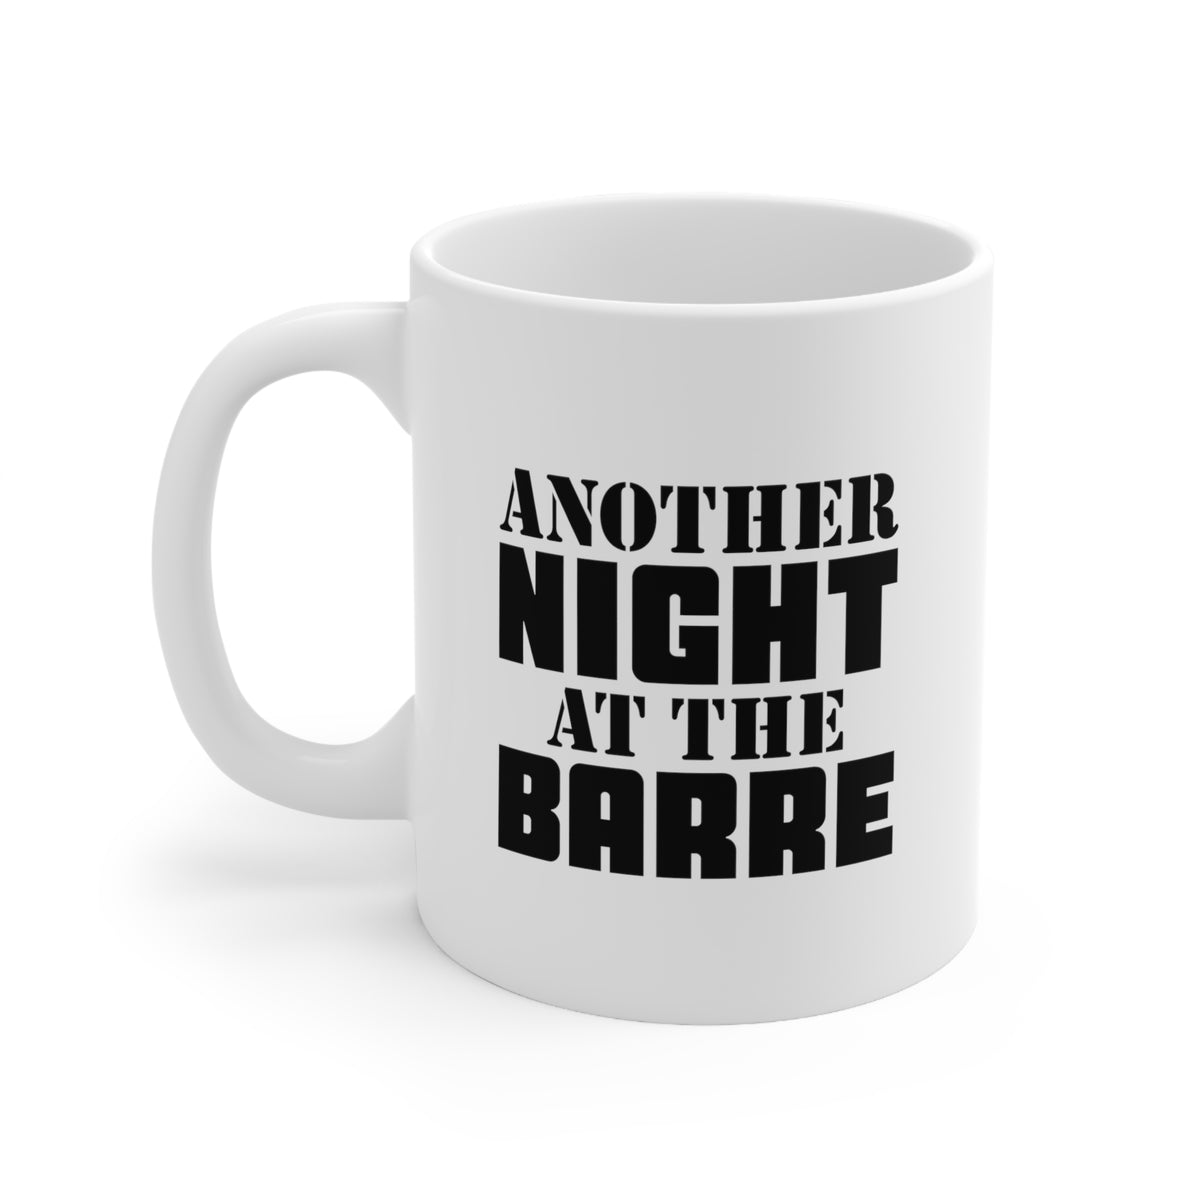 Dancer Gifts - Another Night At The Barre - Perfect Mugs For Dancer